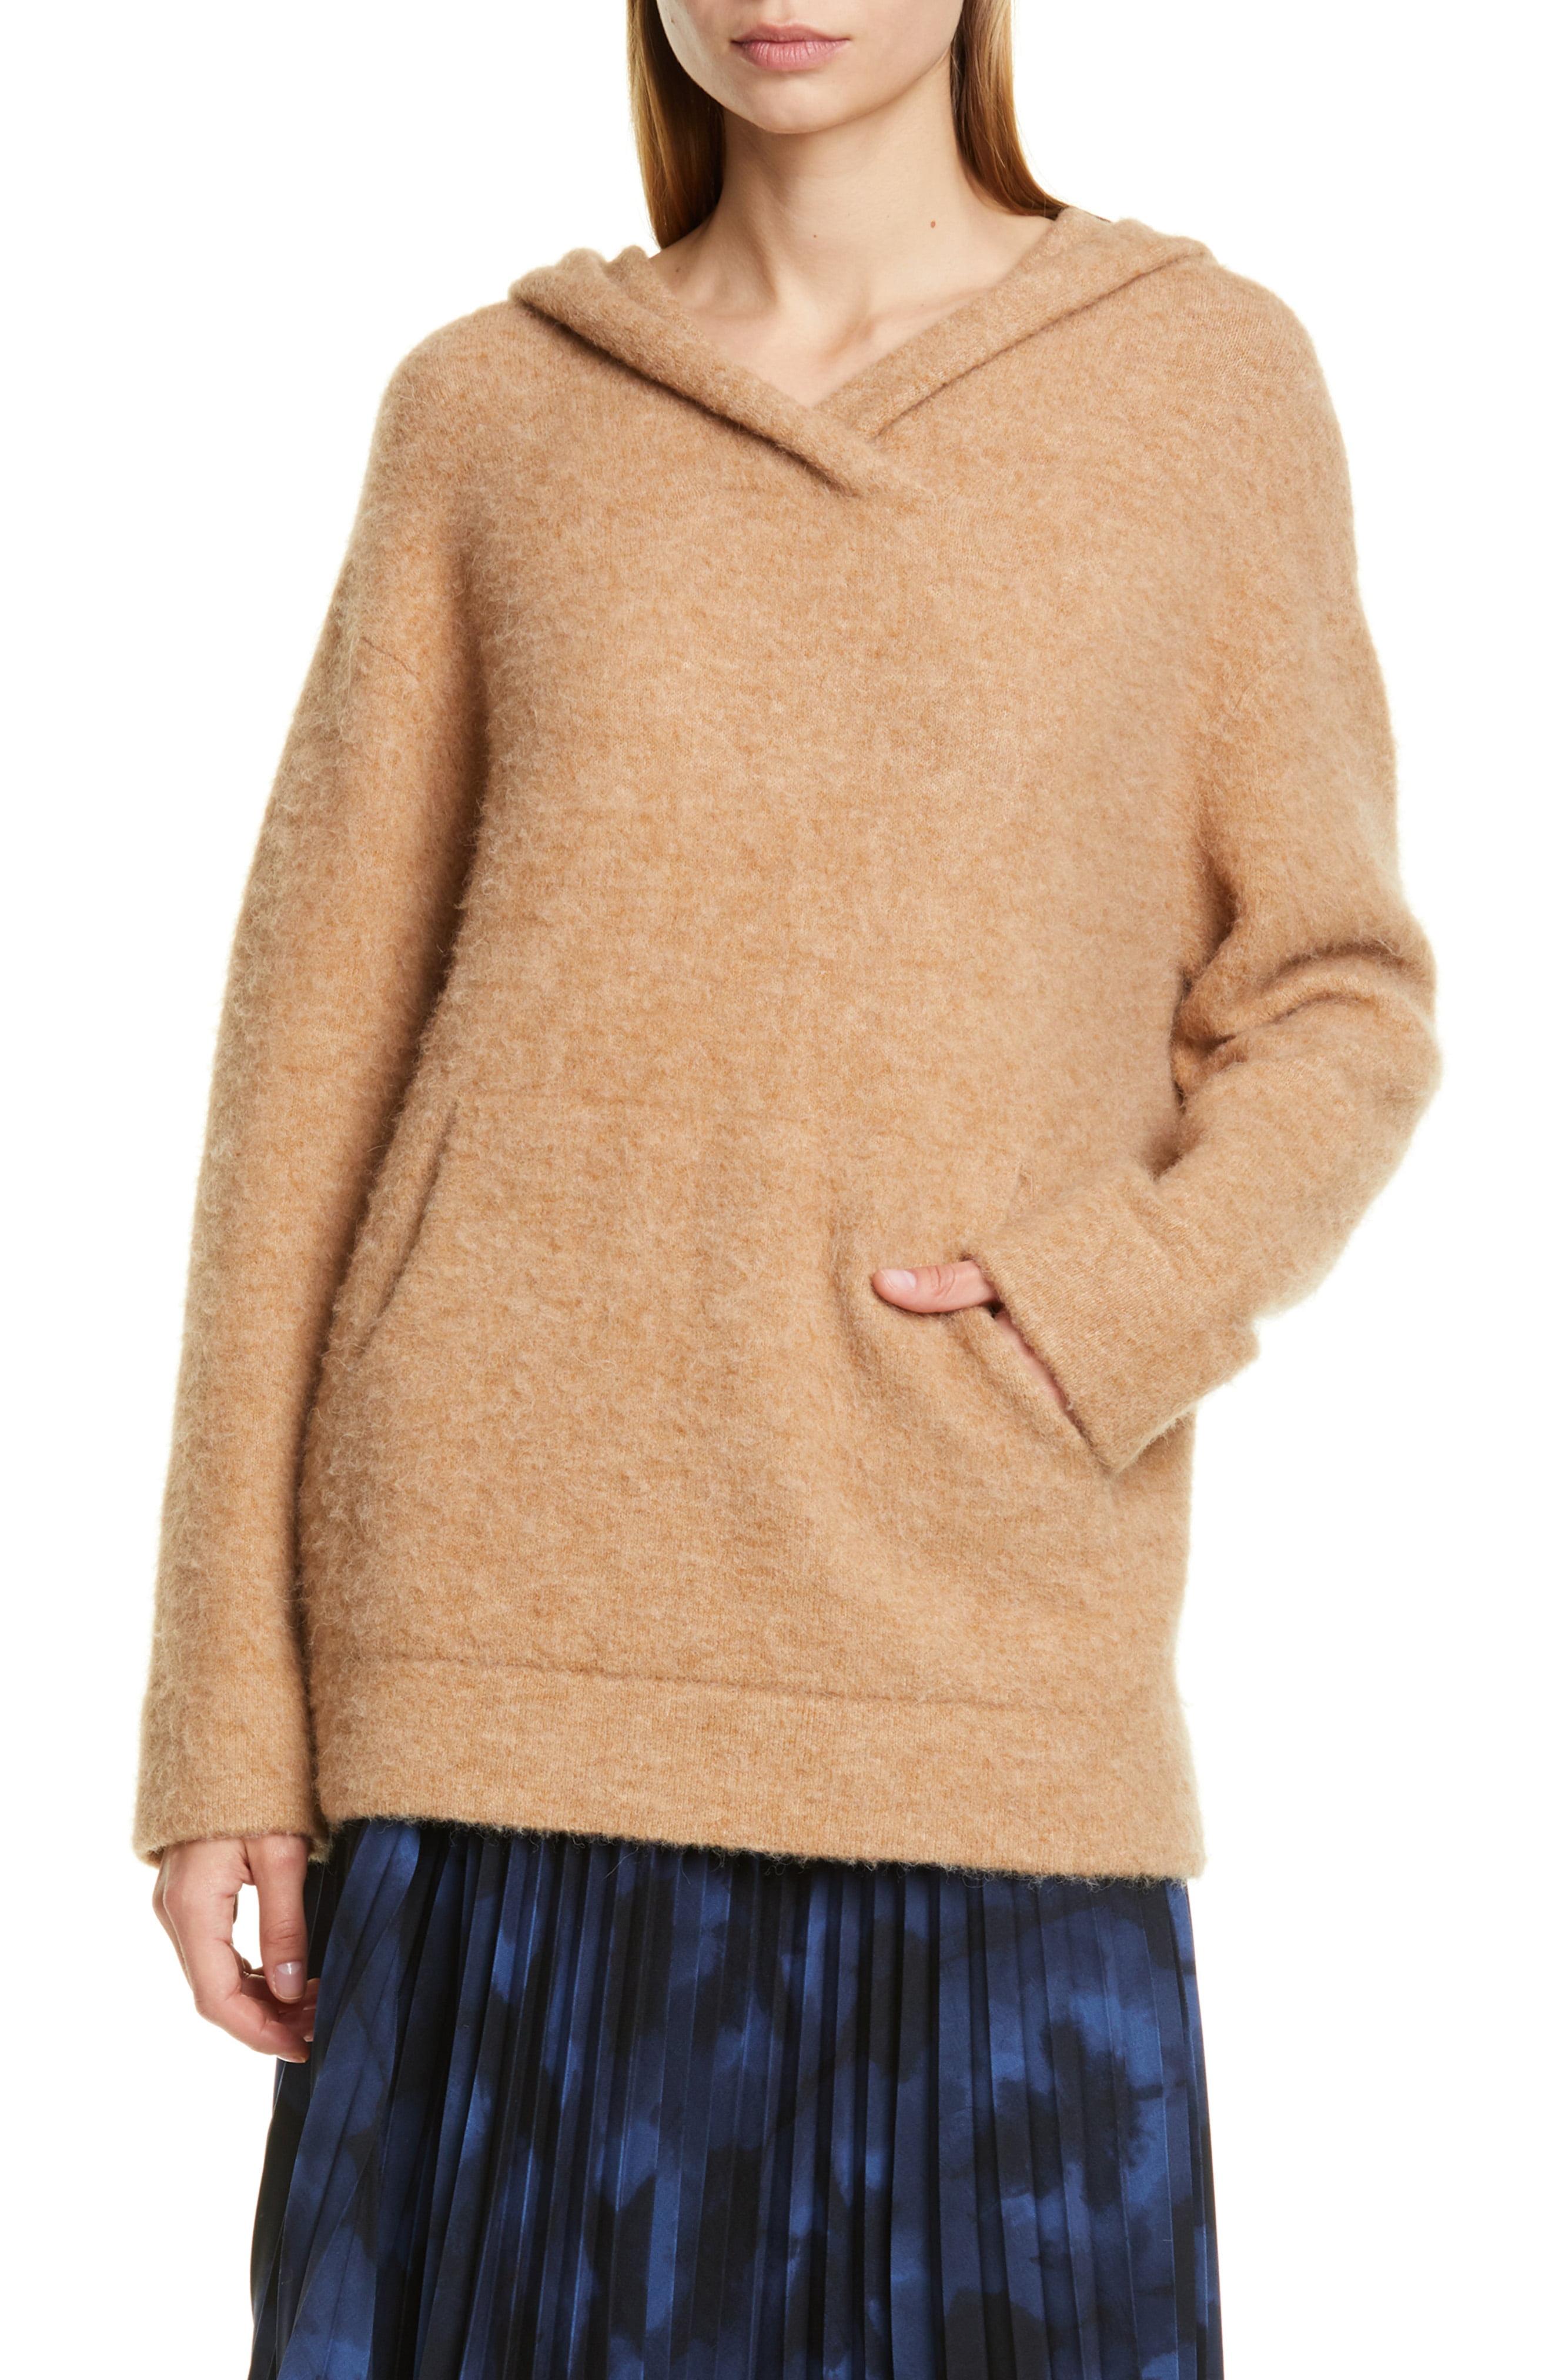 Vince Oversize Hooded Wool & Alpaca Sweater in Camel (Natural) - Lyst